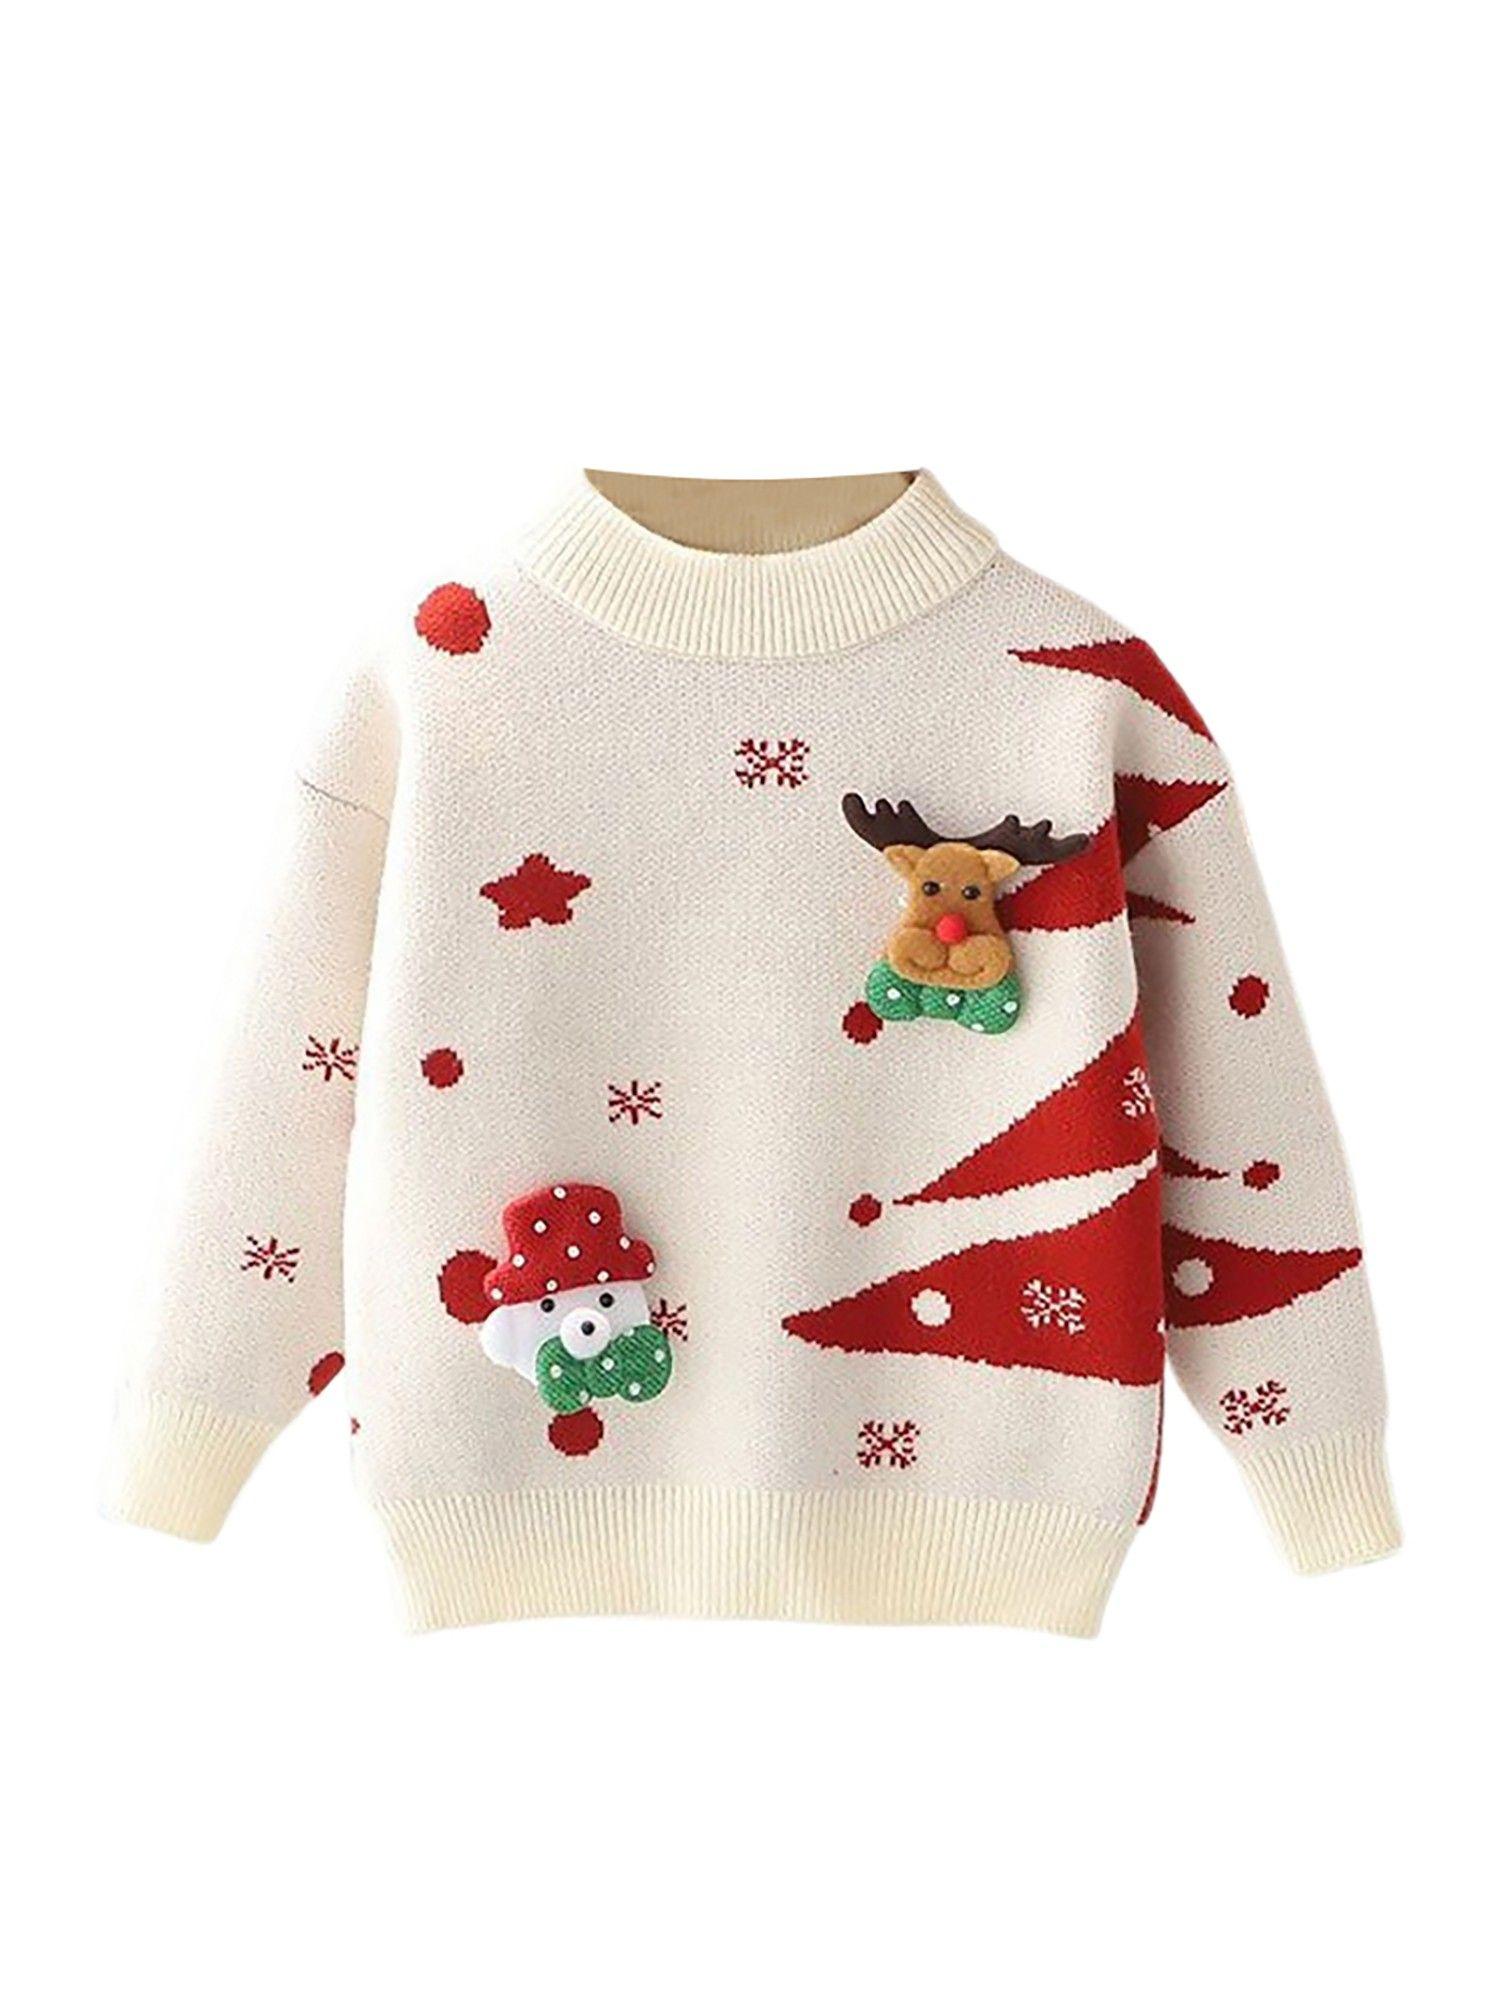 white with red xmas tree warmer sweater